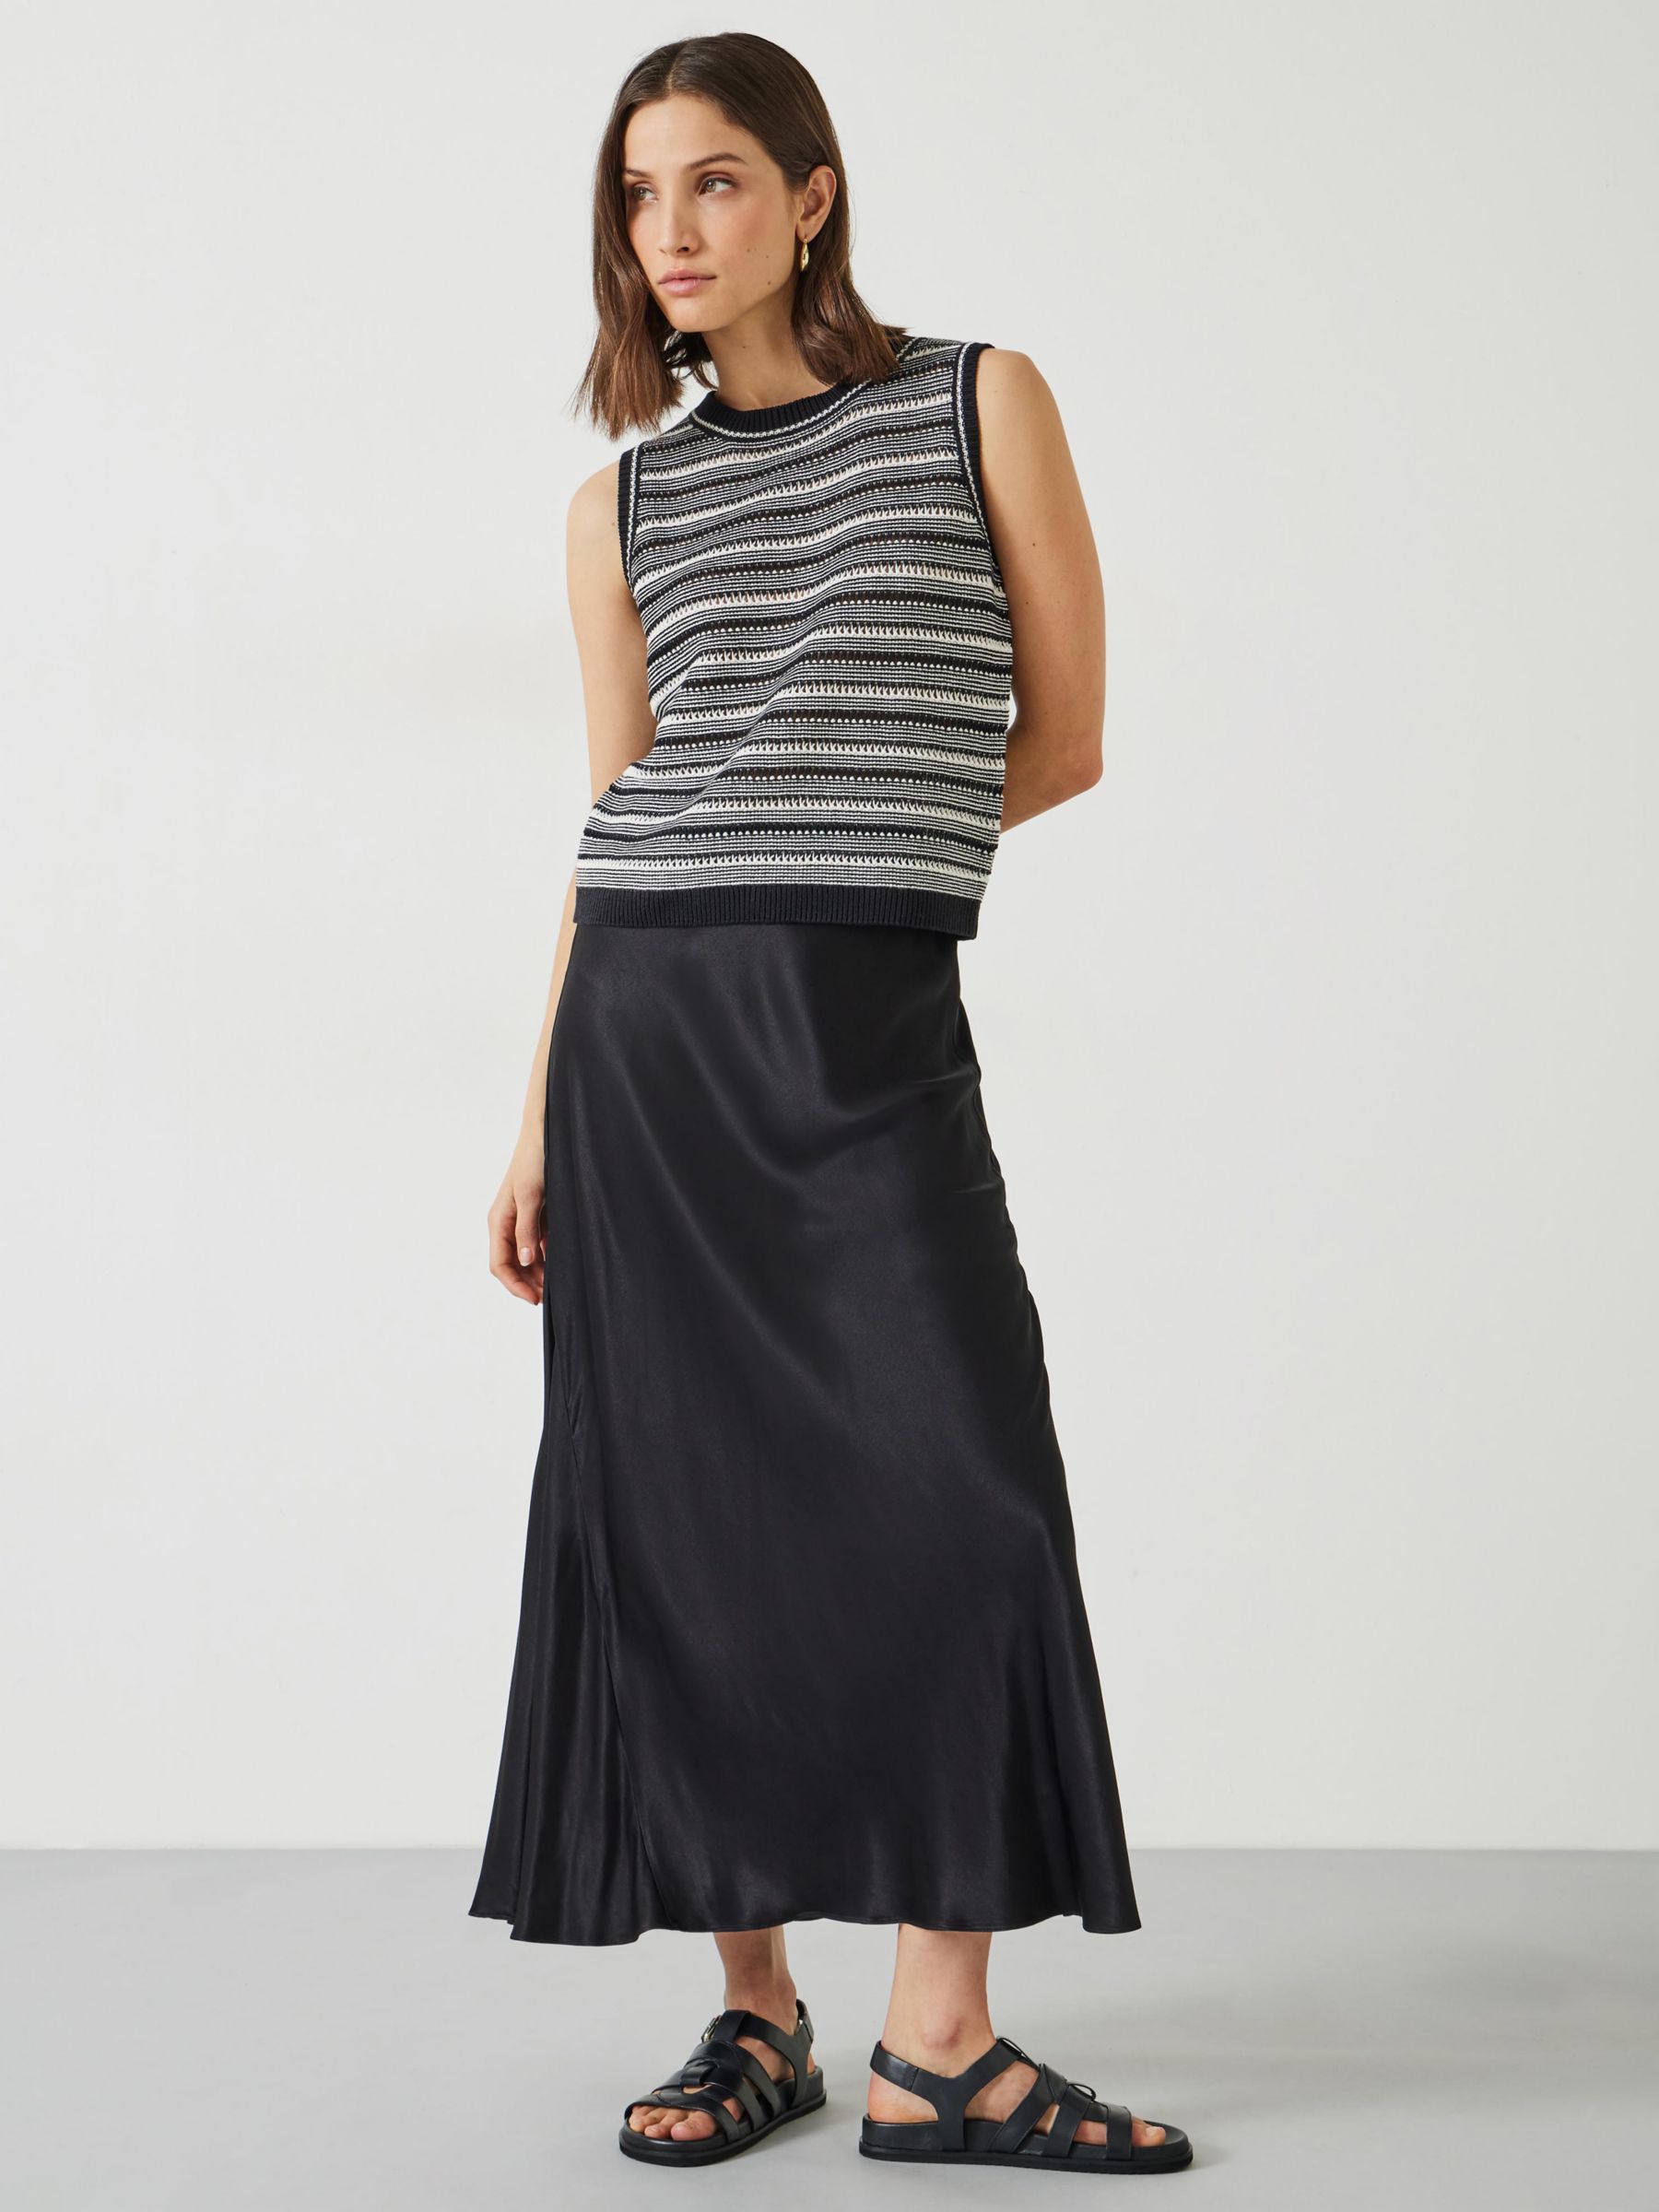 HUSH Shannon Textured Knitted Tank Top, Black/Soft White at John Lewis ...